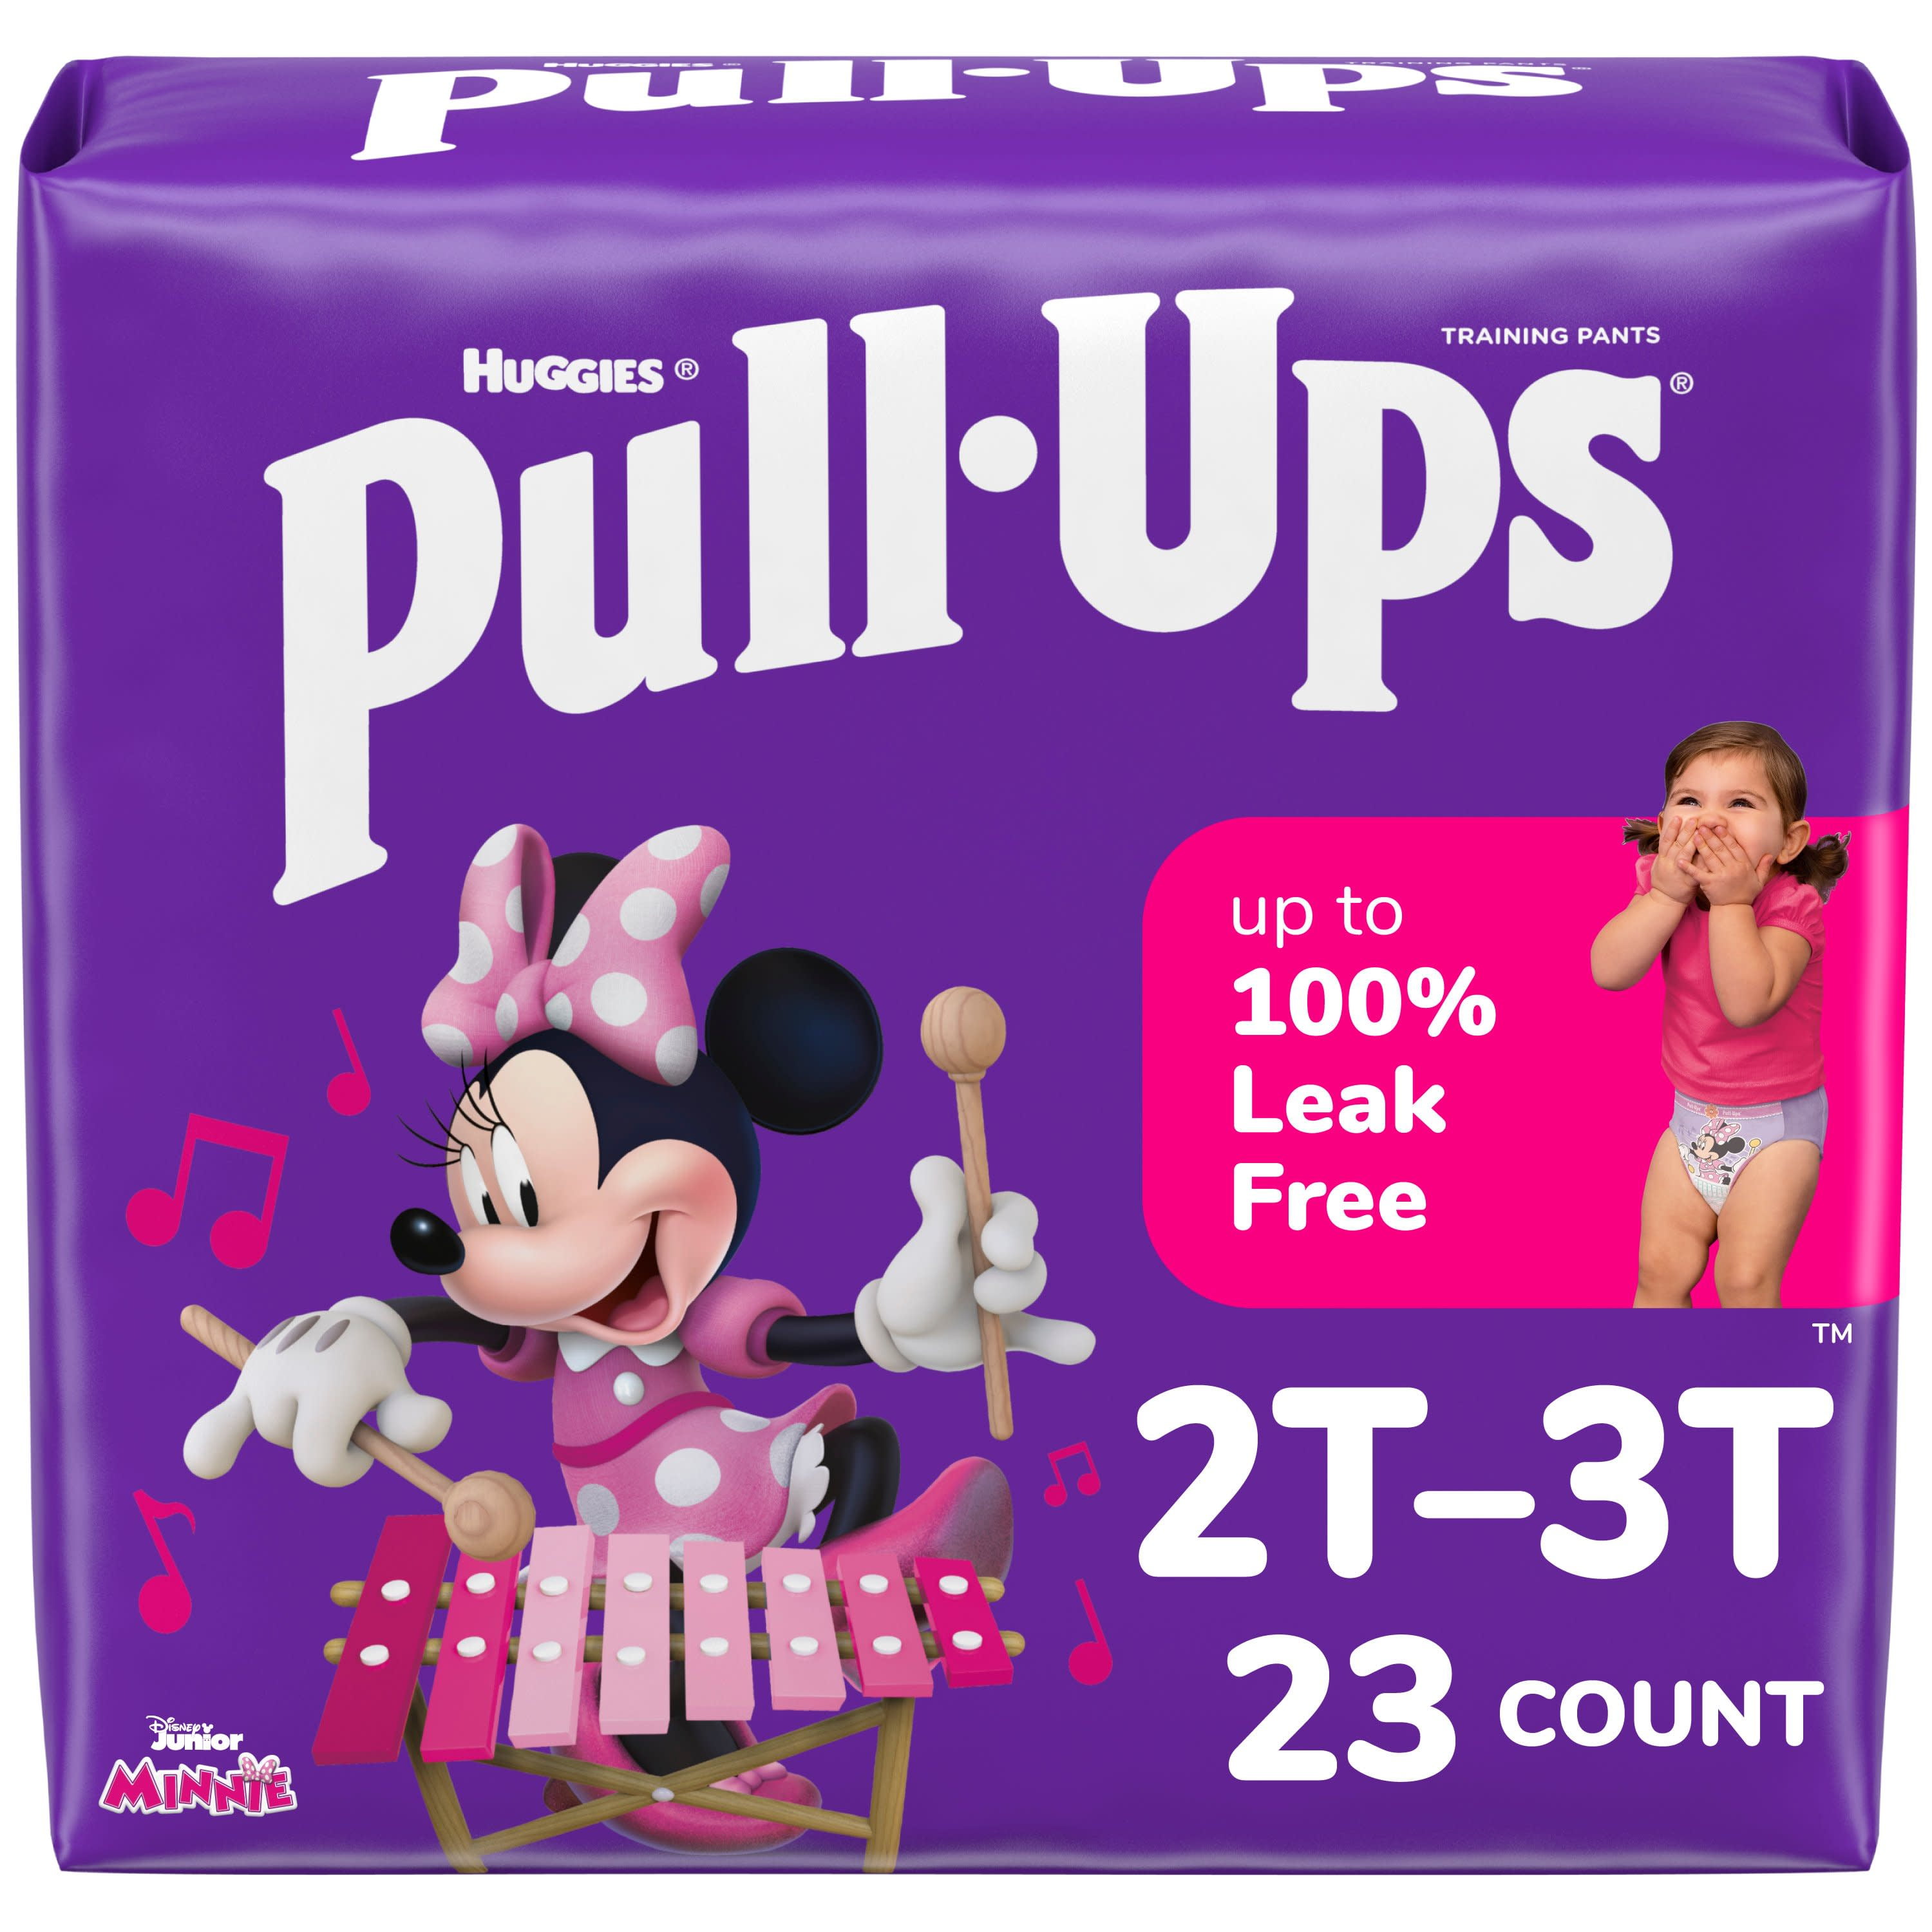 Petition · For Huggies to Bring Back the Pink Cinderella/Minnie Mouse Pull  Up designs! ·